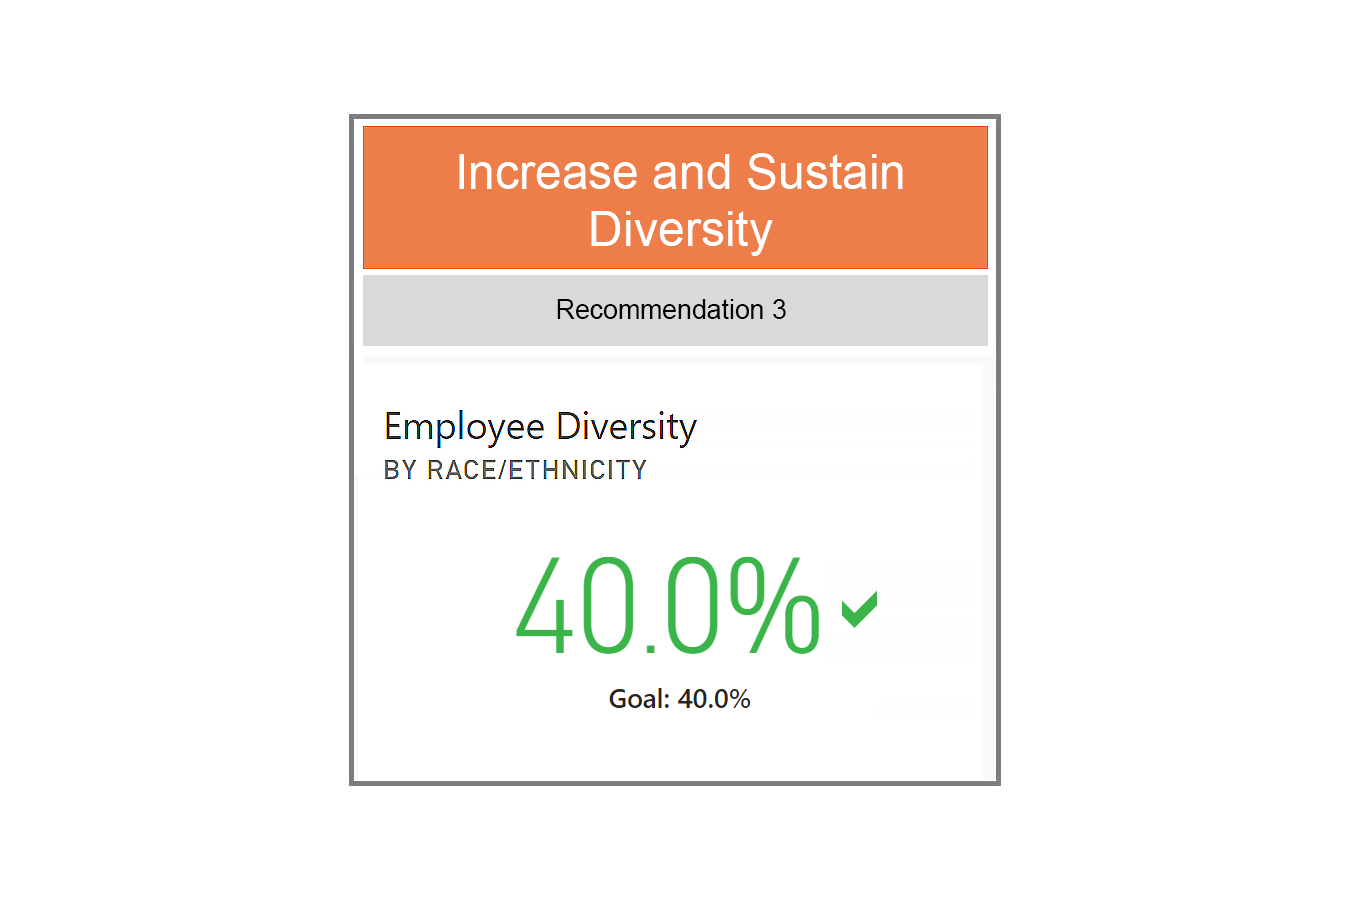 Increase and sustain diversity